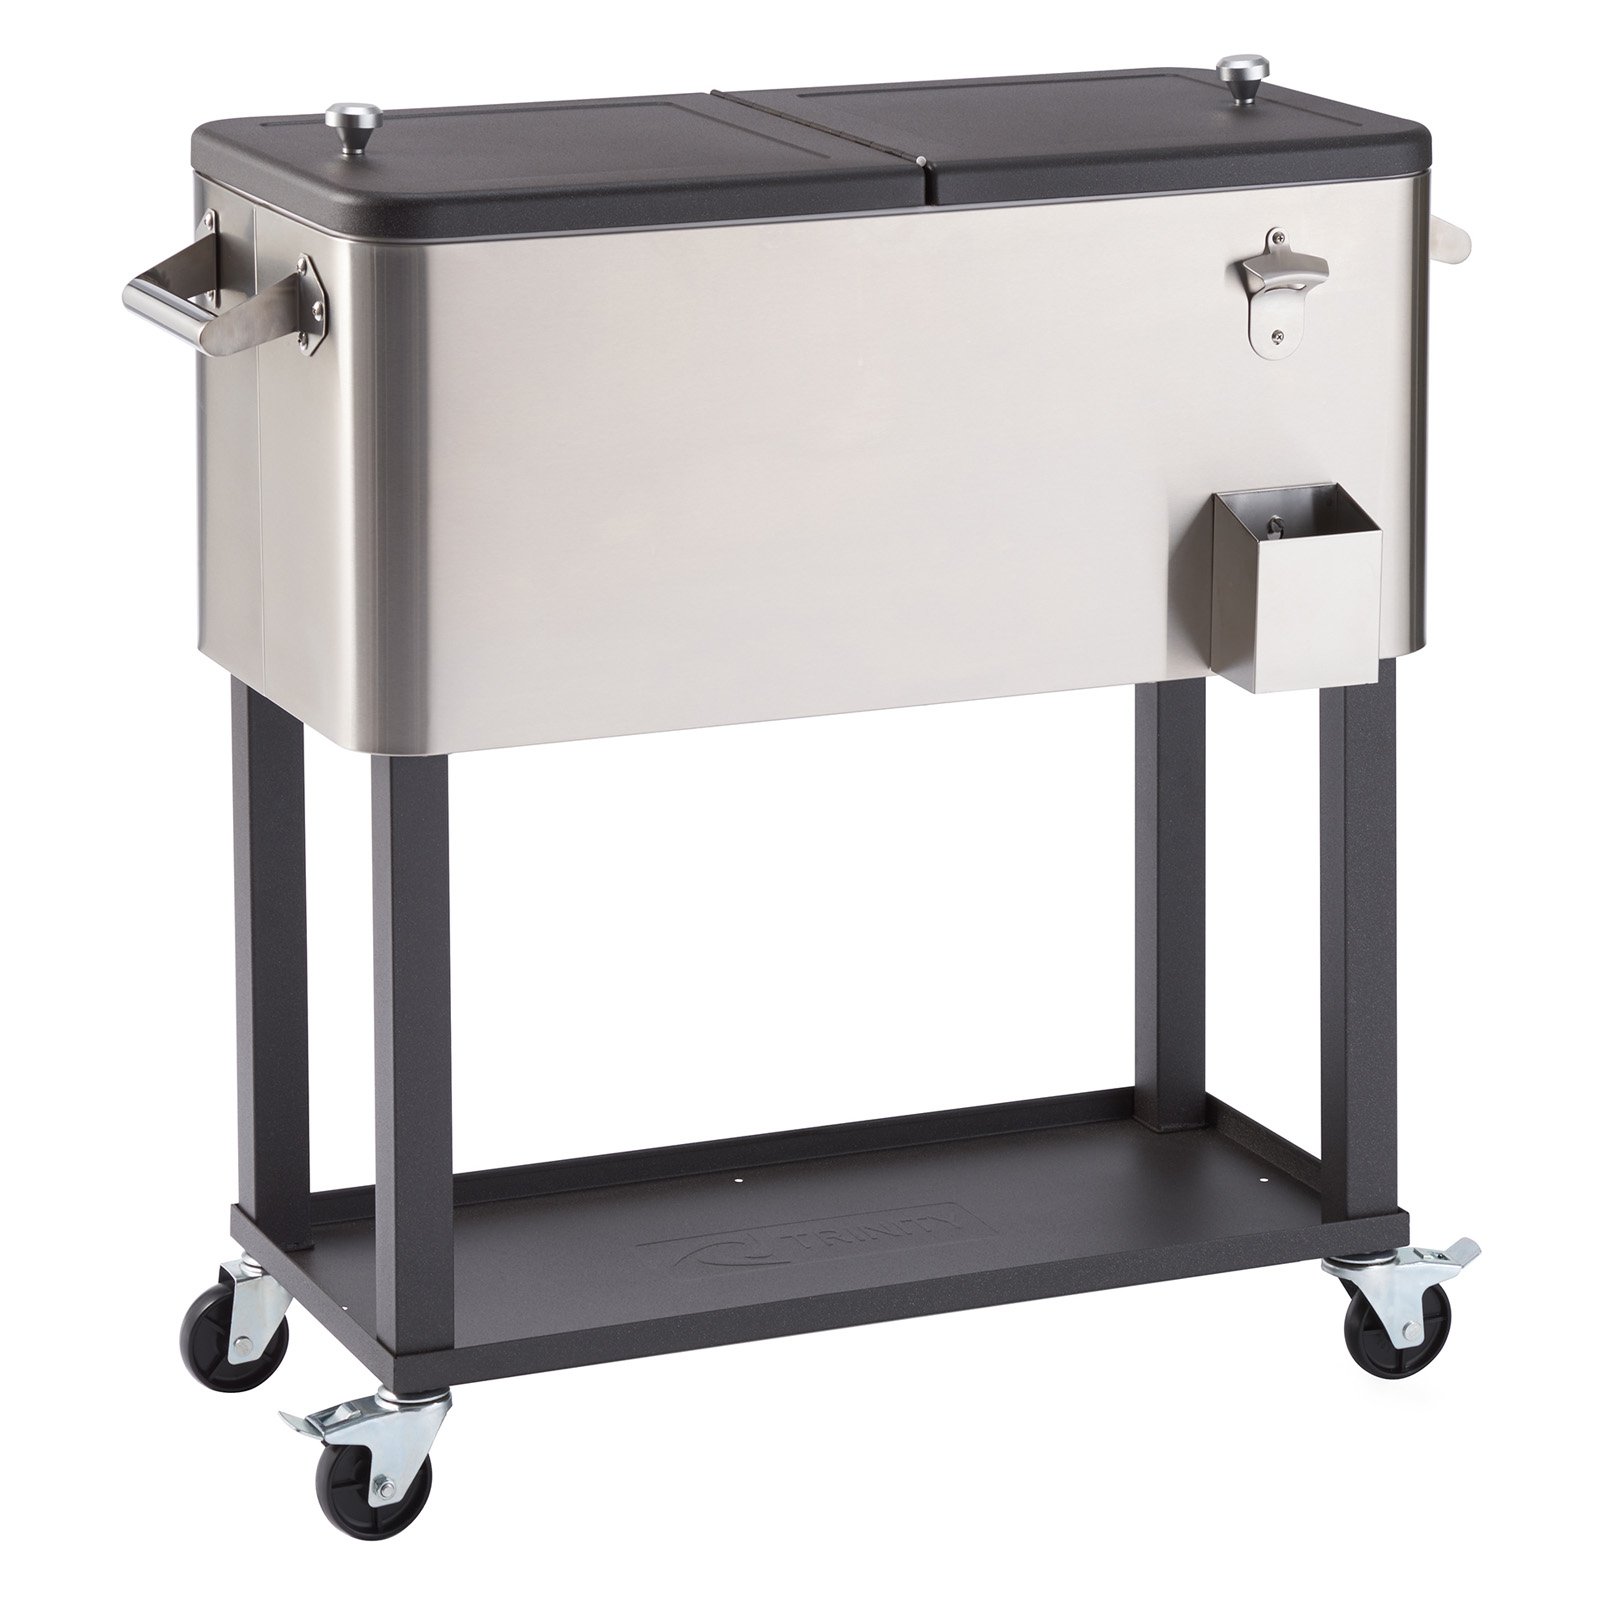 TRINITY 100 Quart Stainless Steel Cooler w/ Shelf - image 3 of 8